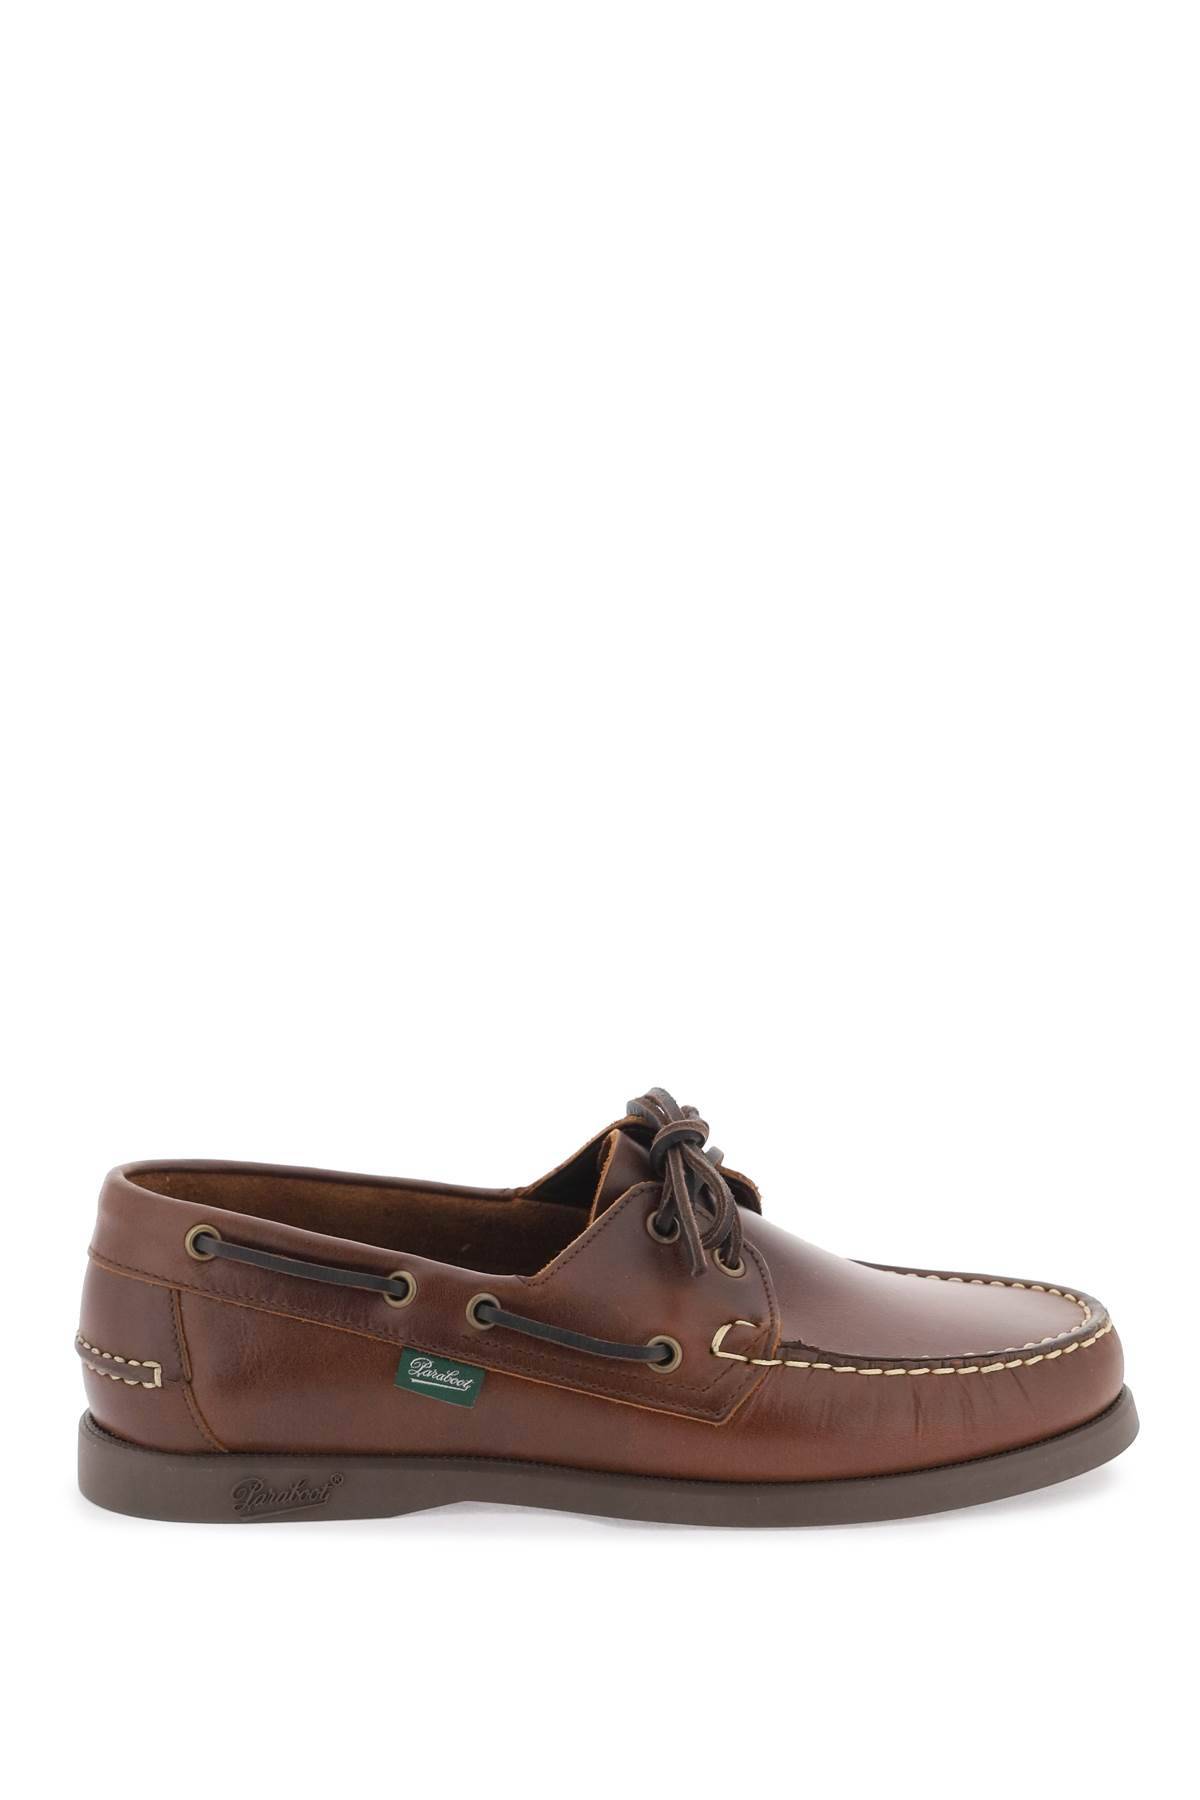 Paraboot PARABOOT barth loafers